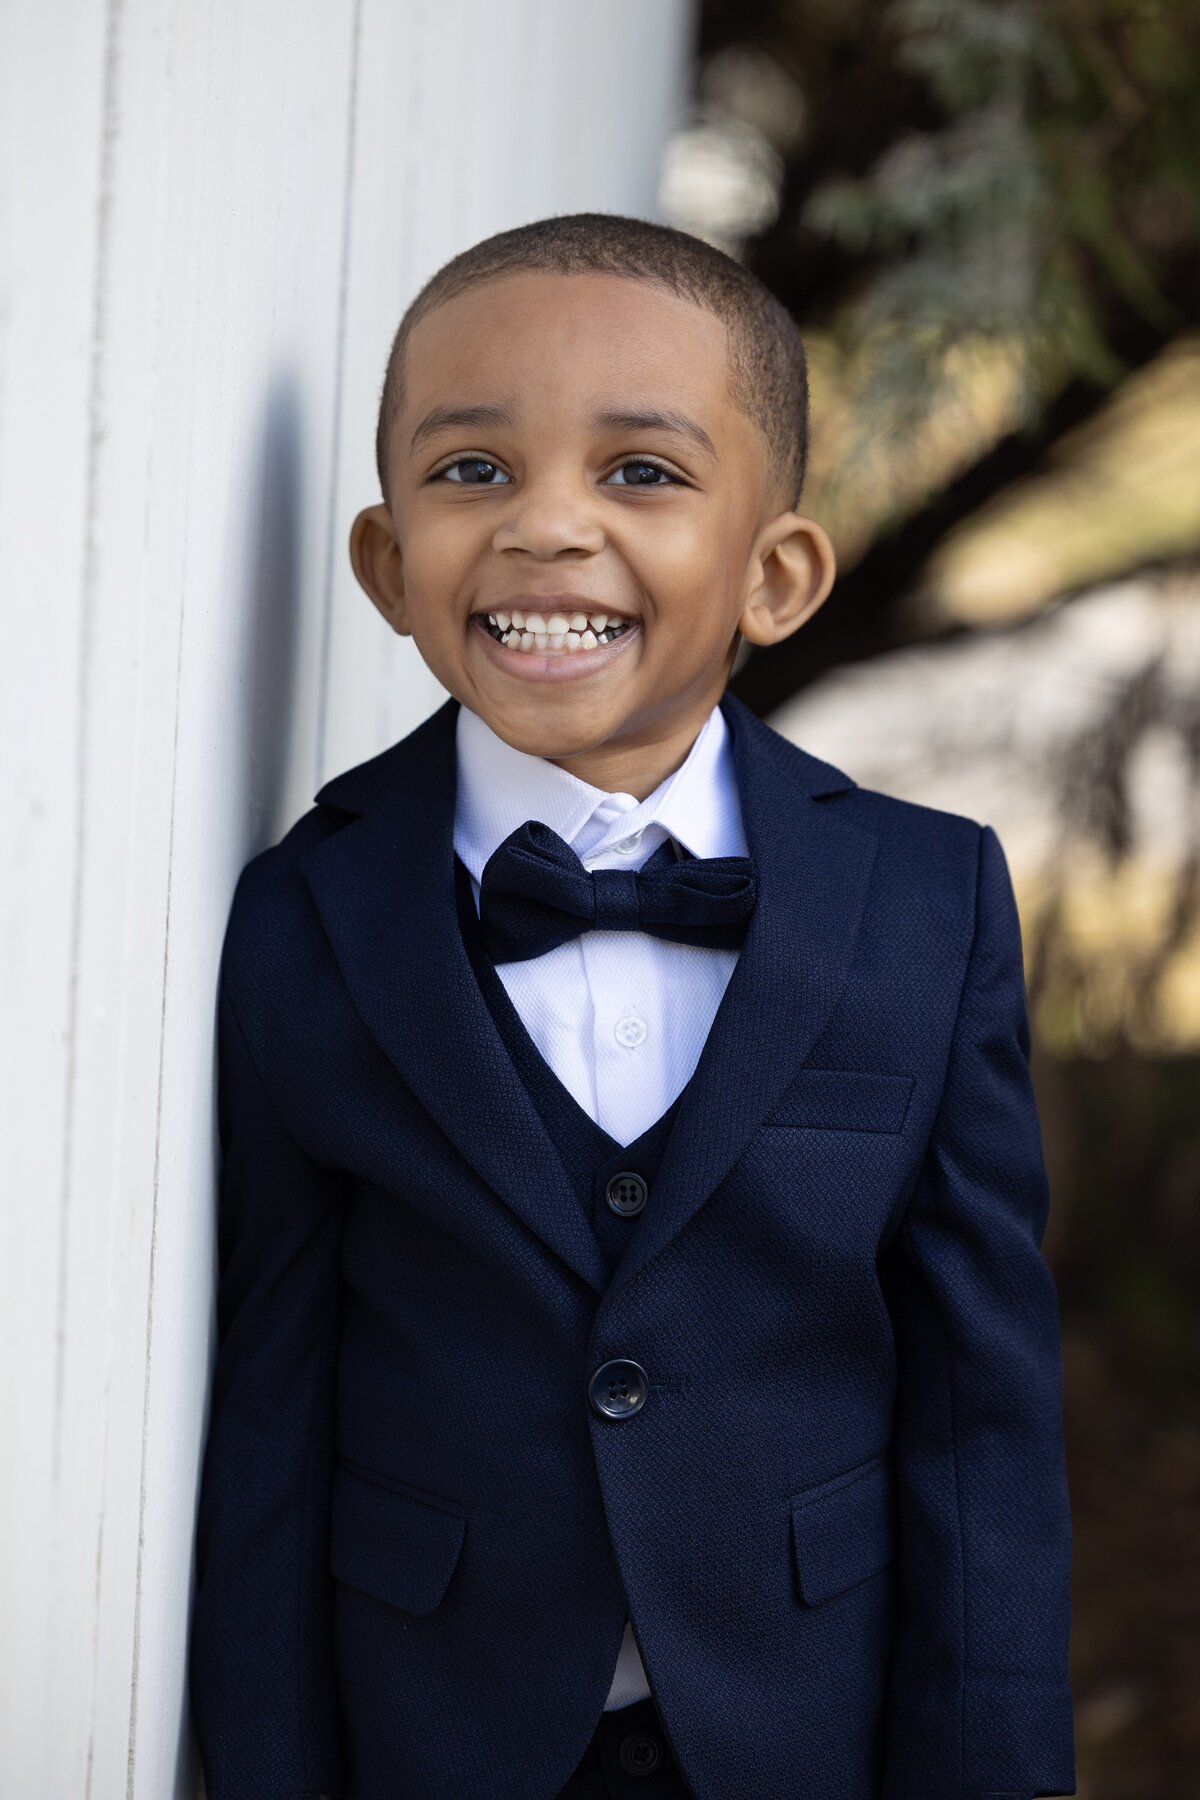 a boy in a navy suit smiling